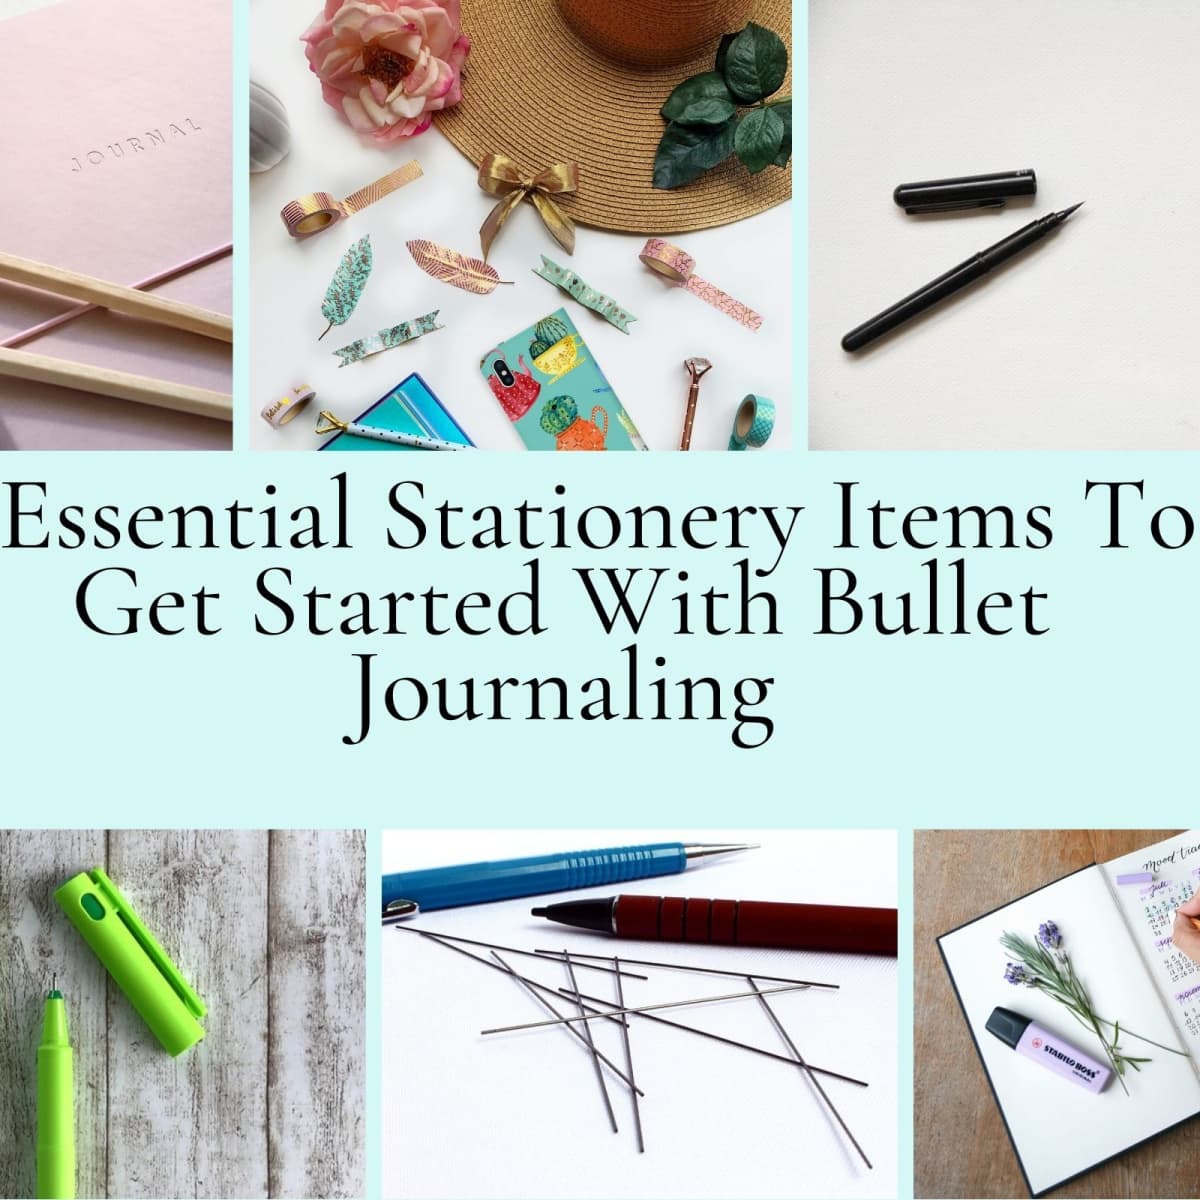 STATIONERY ESSENTIALS for note-taking & journaling